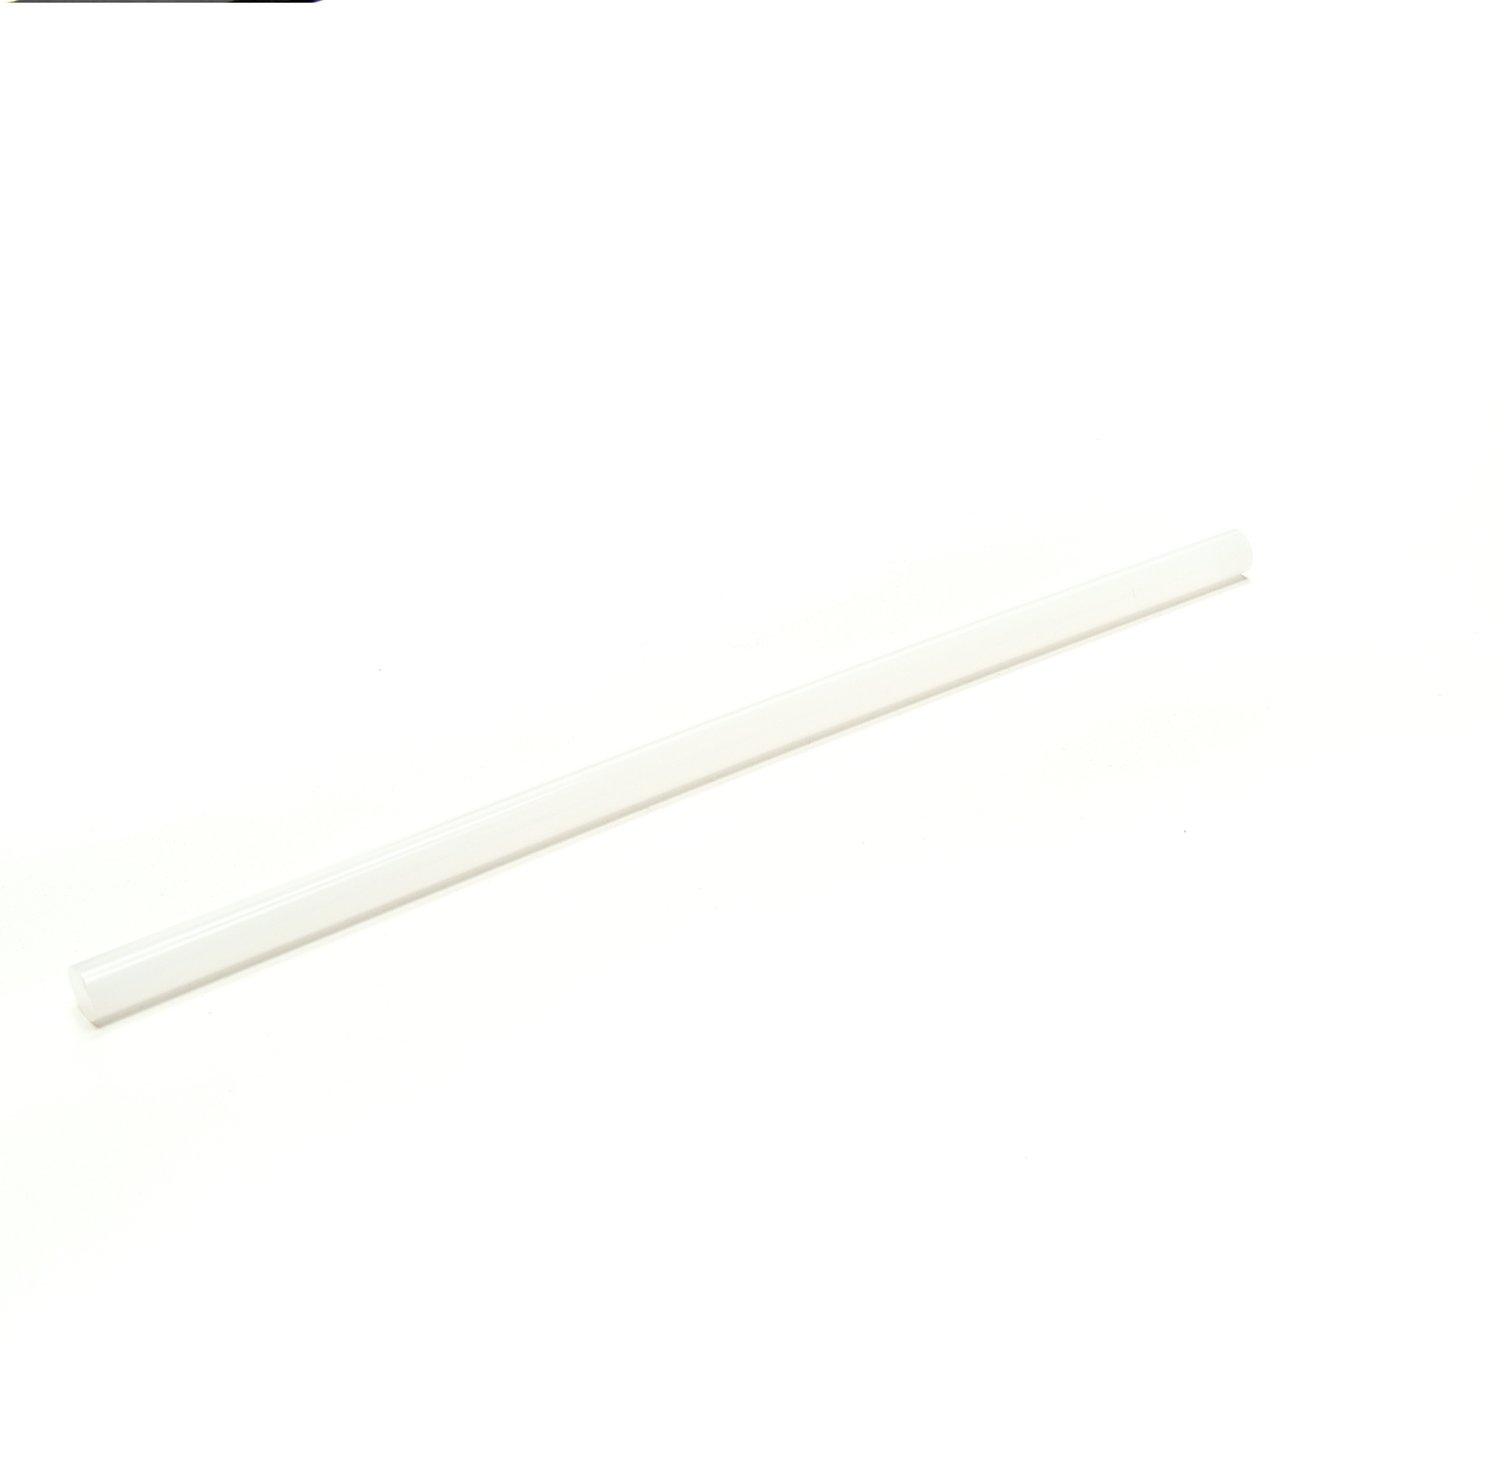 7000000885 - 3M Hot Melt Adhesive 3764AE, Clear, 0.45 in x 12 in, 11 lb, Case